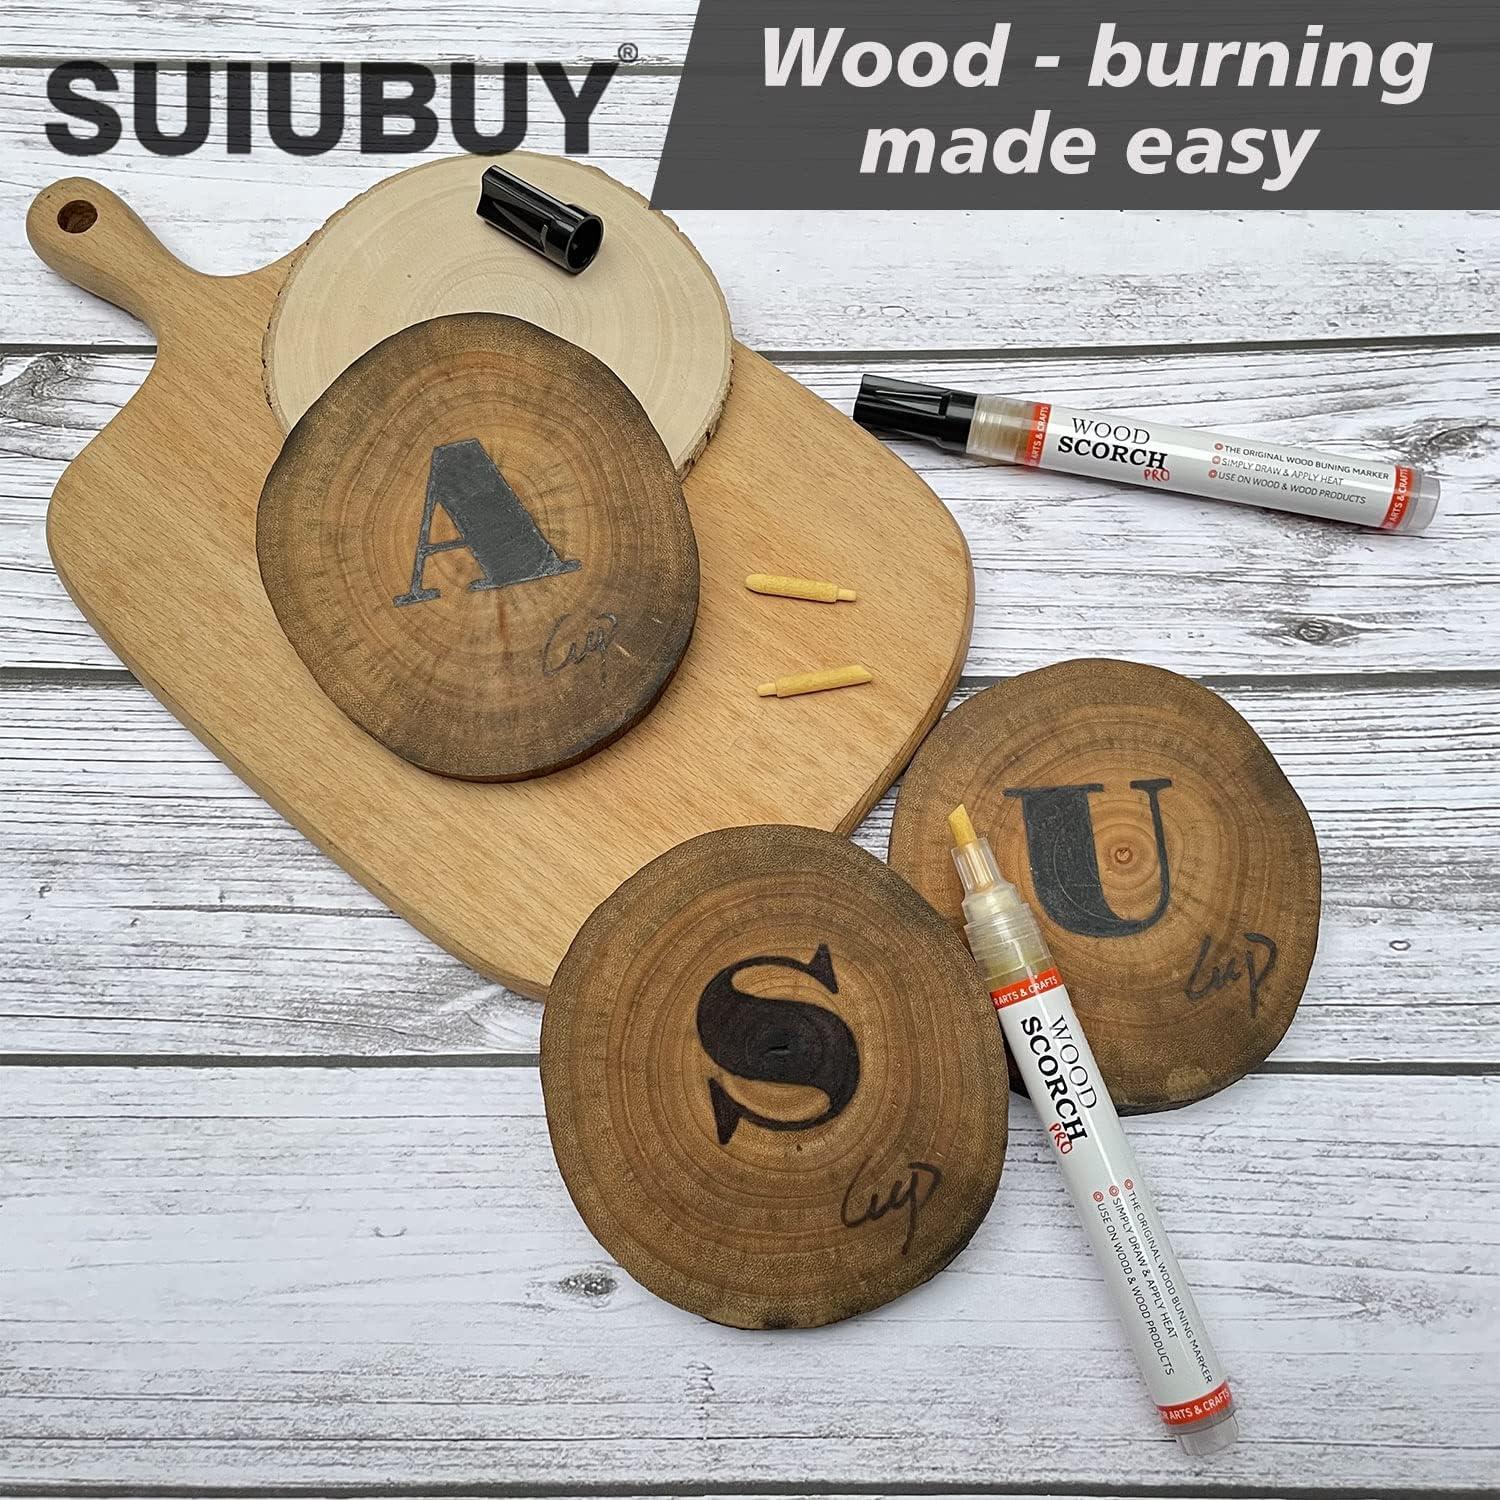 Scorch Markers Chemical Wood Burning Pen For Project Woodworking DIY I3U8